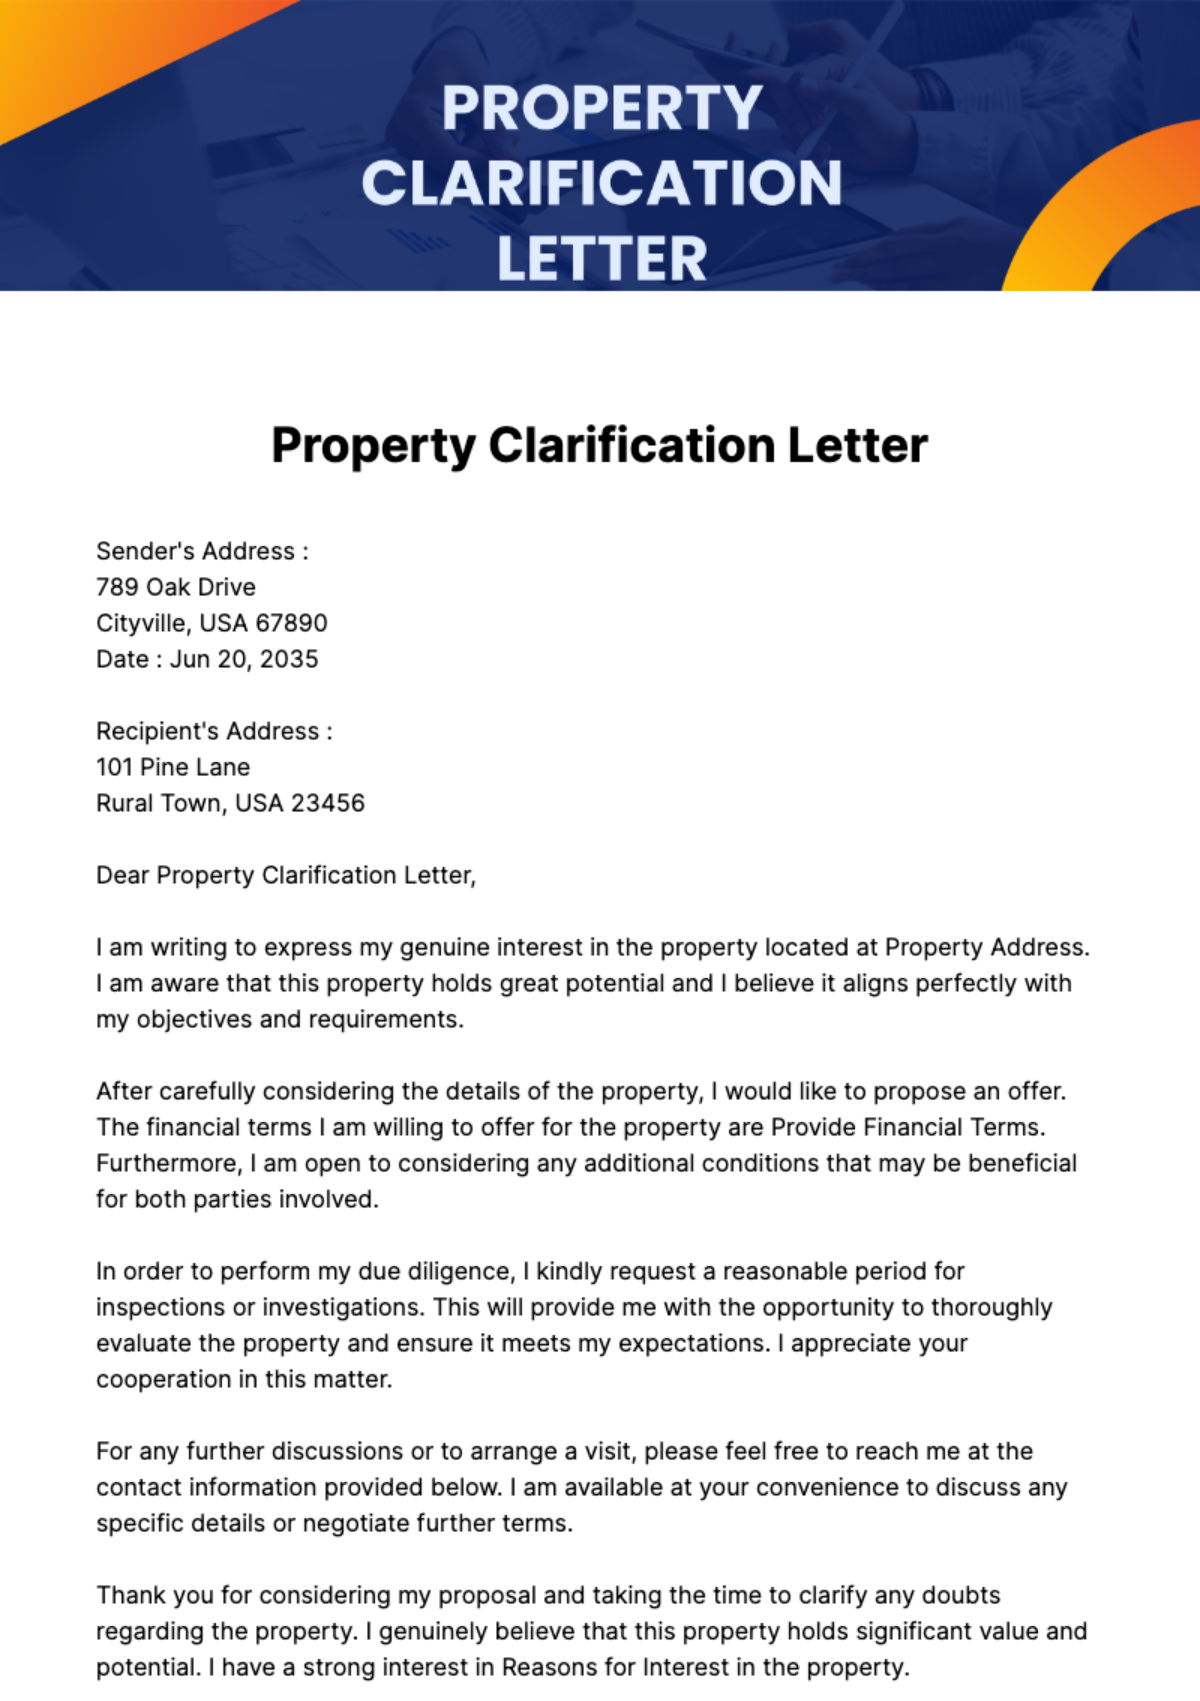 Free Property Clarification Letter Template